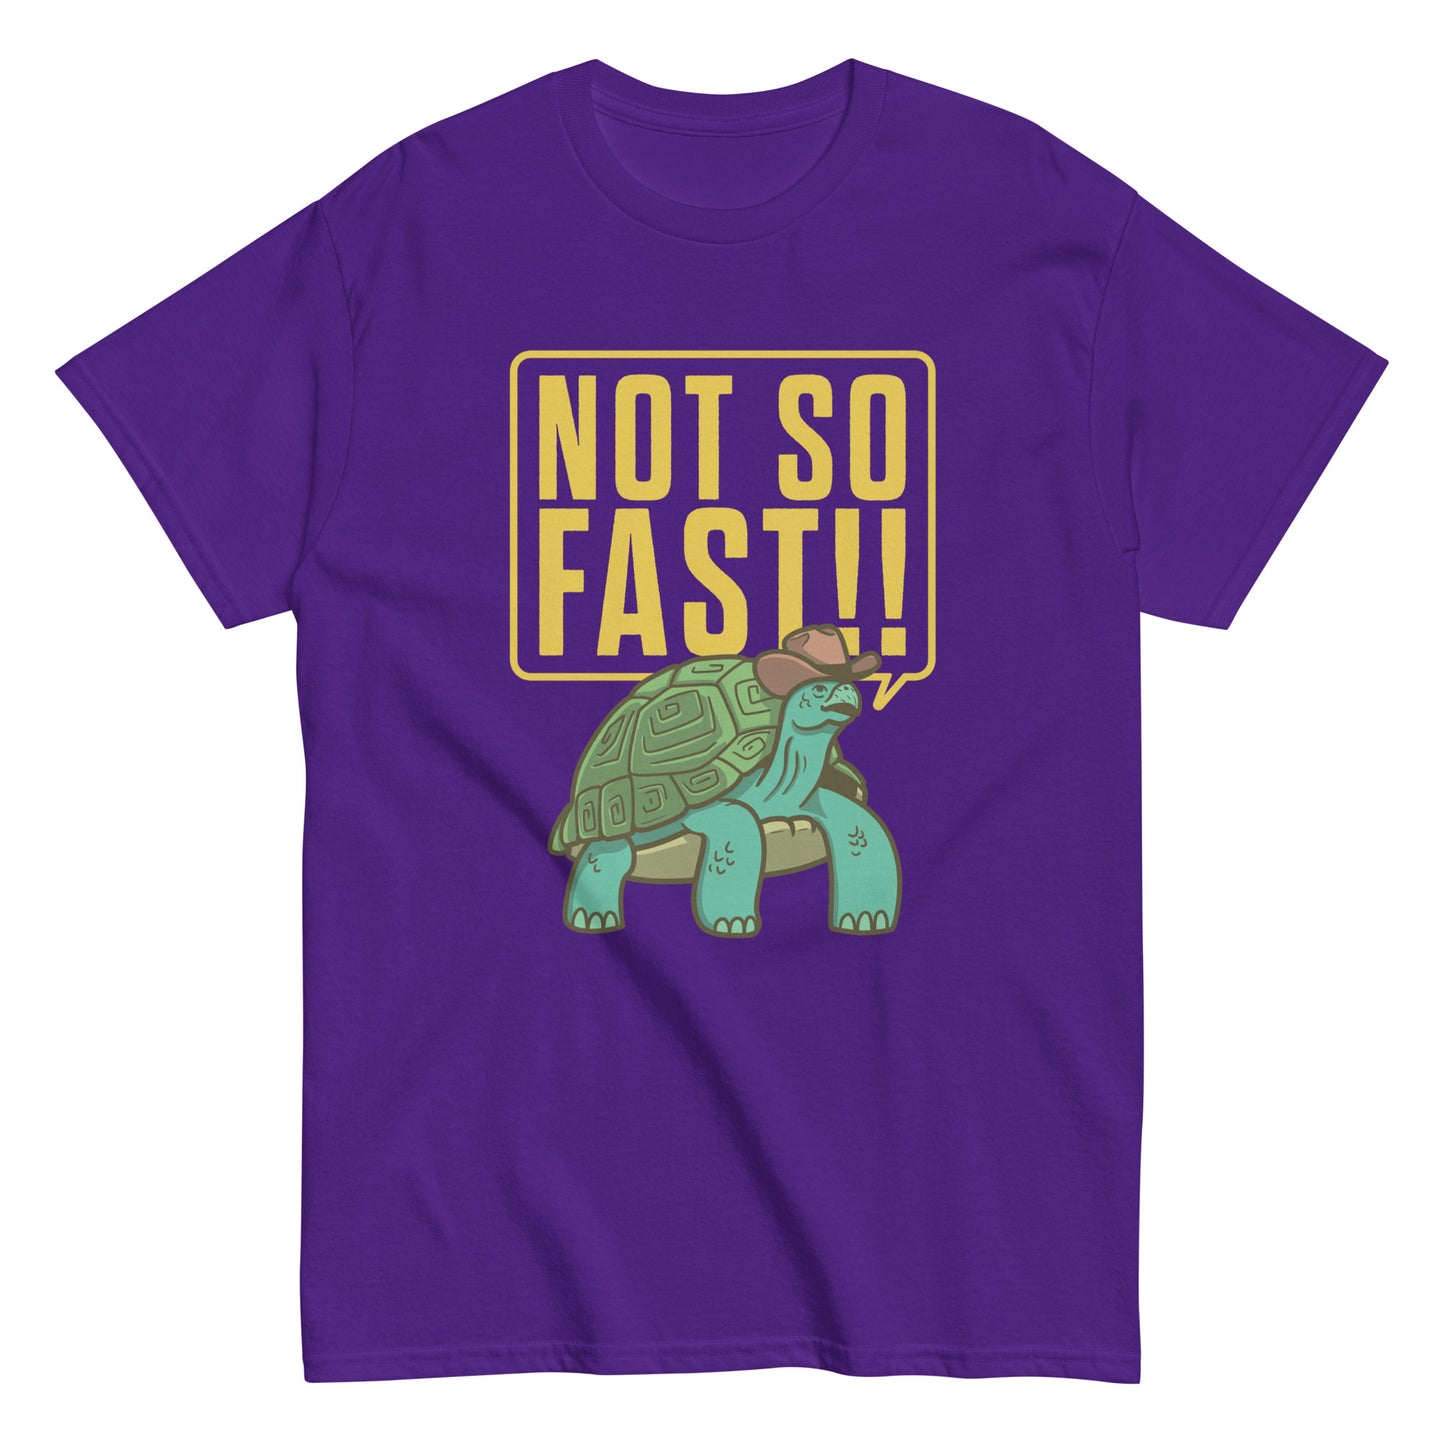 Not So Fast!! Men's Classic Tee